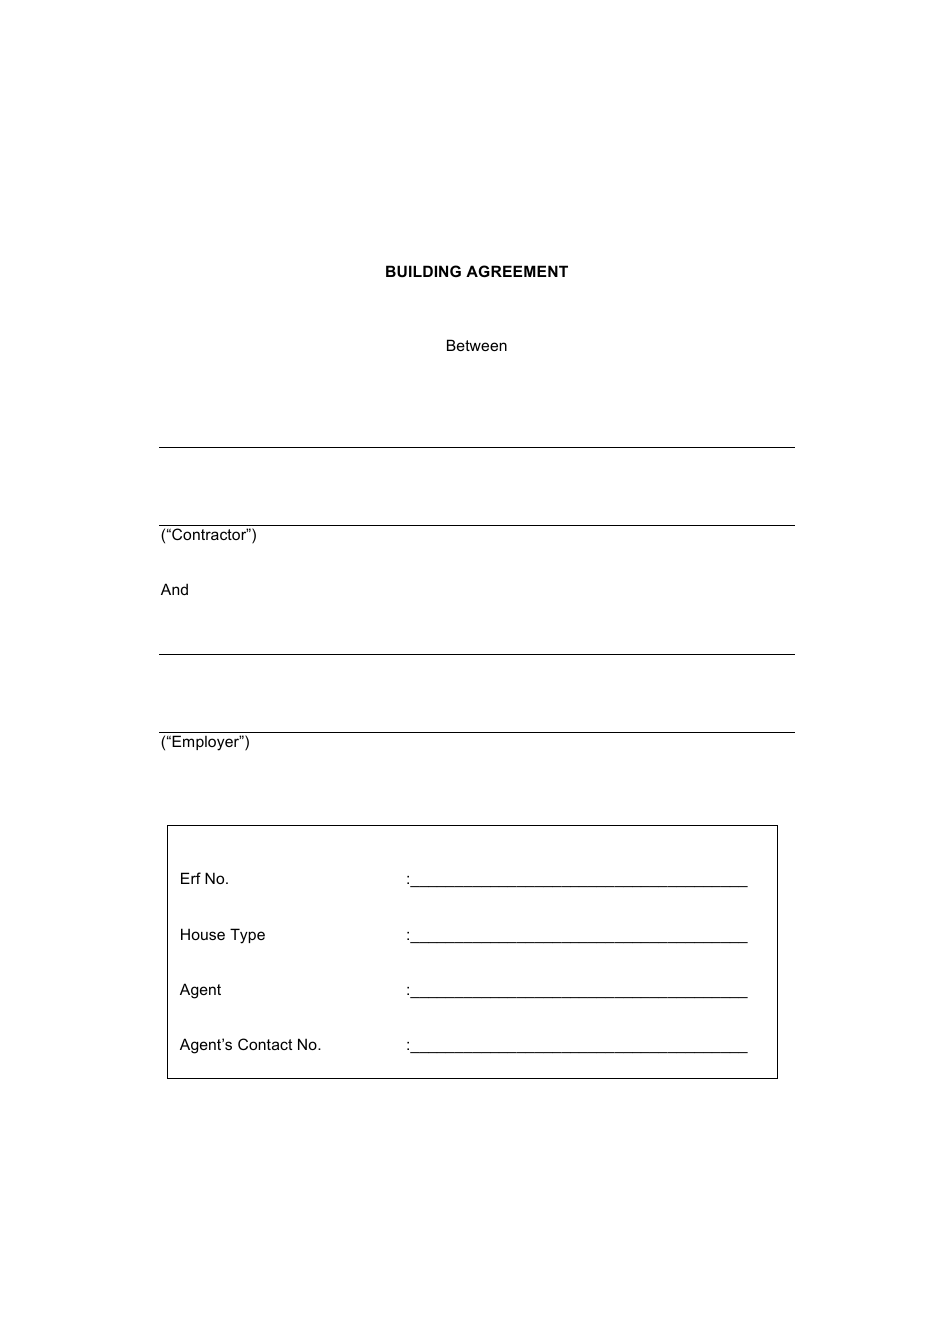 Building Agreement Template - Tables, Page 1